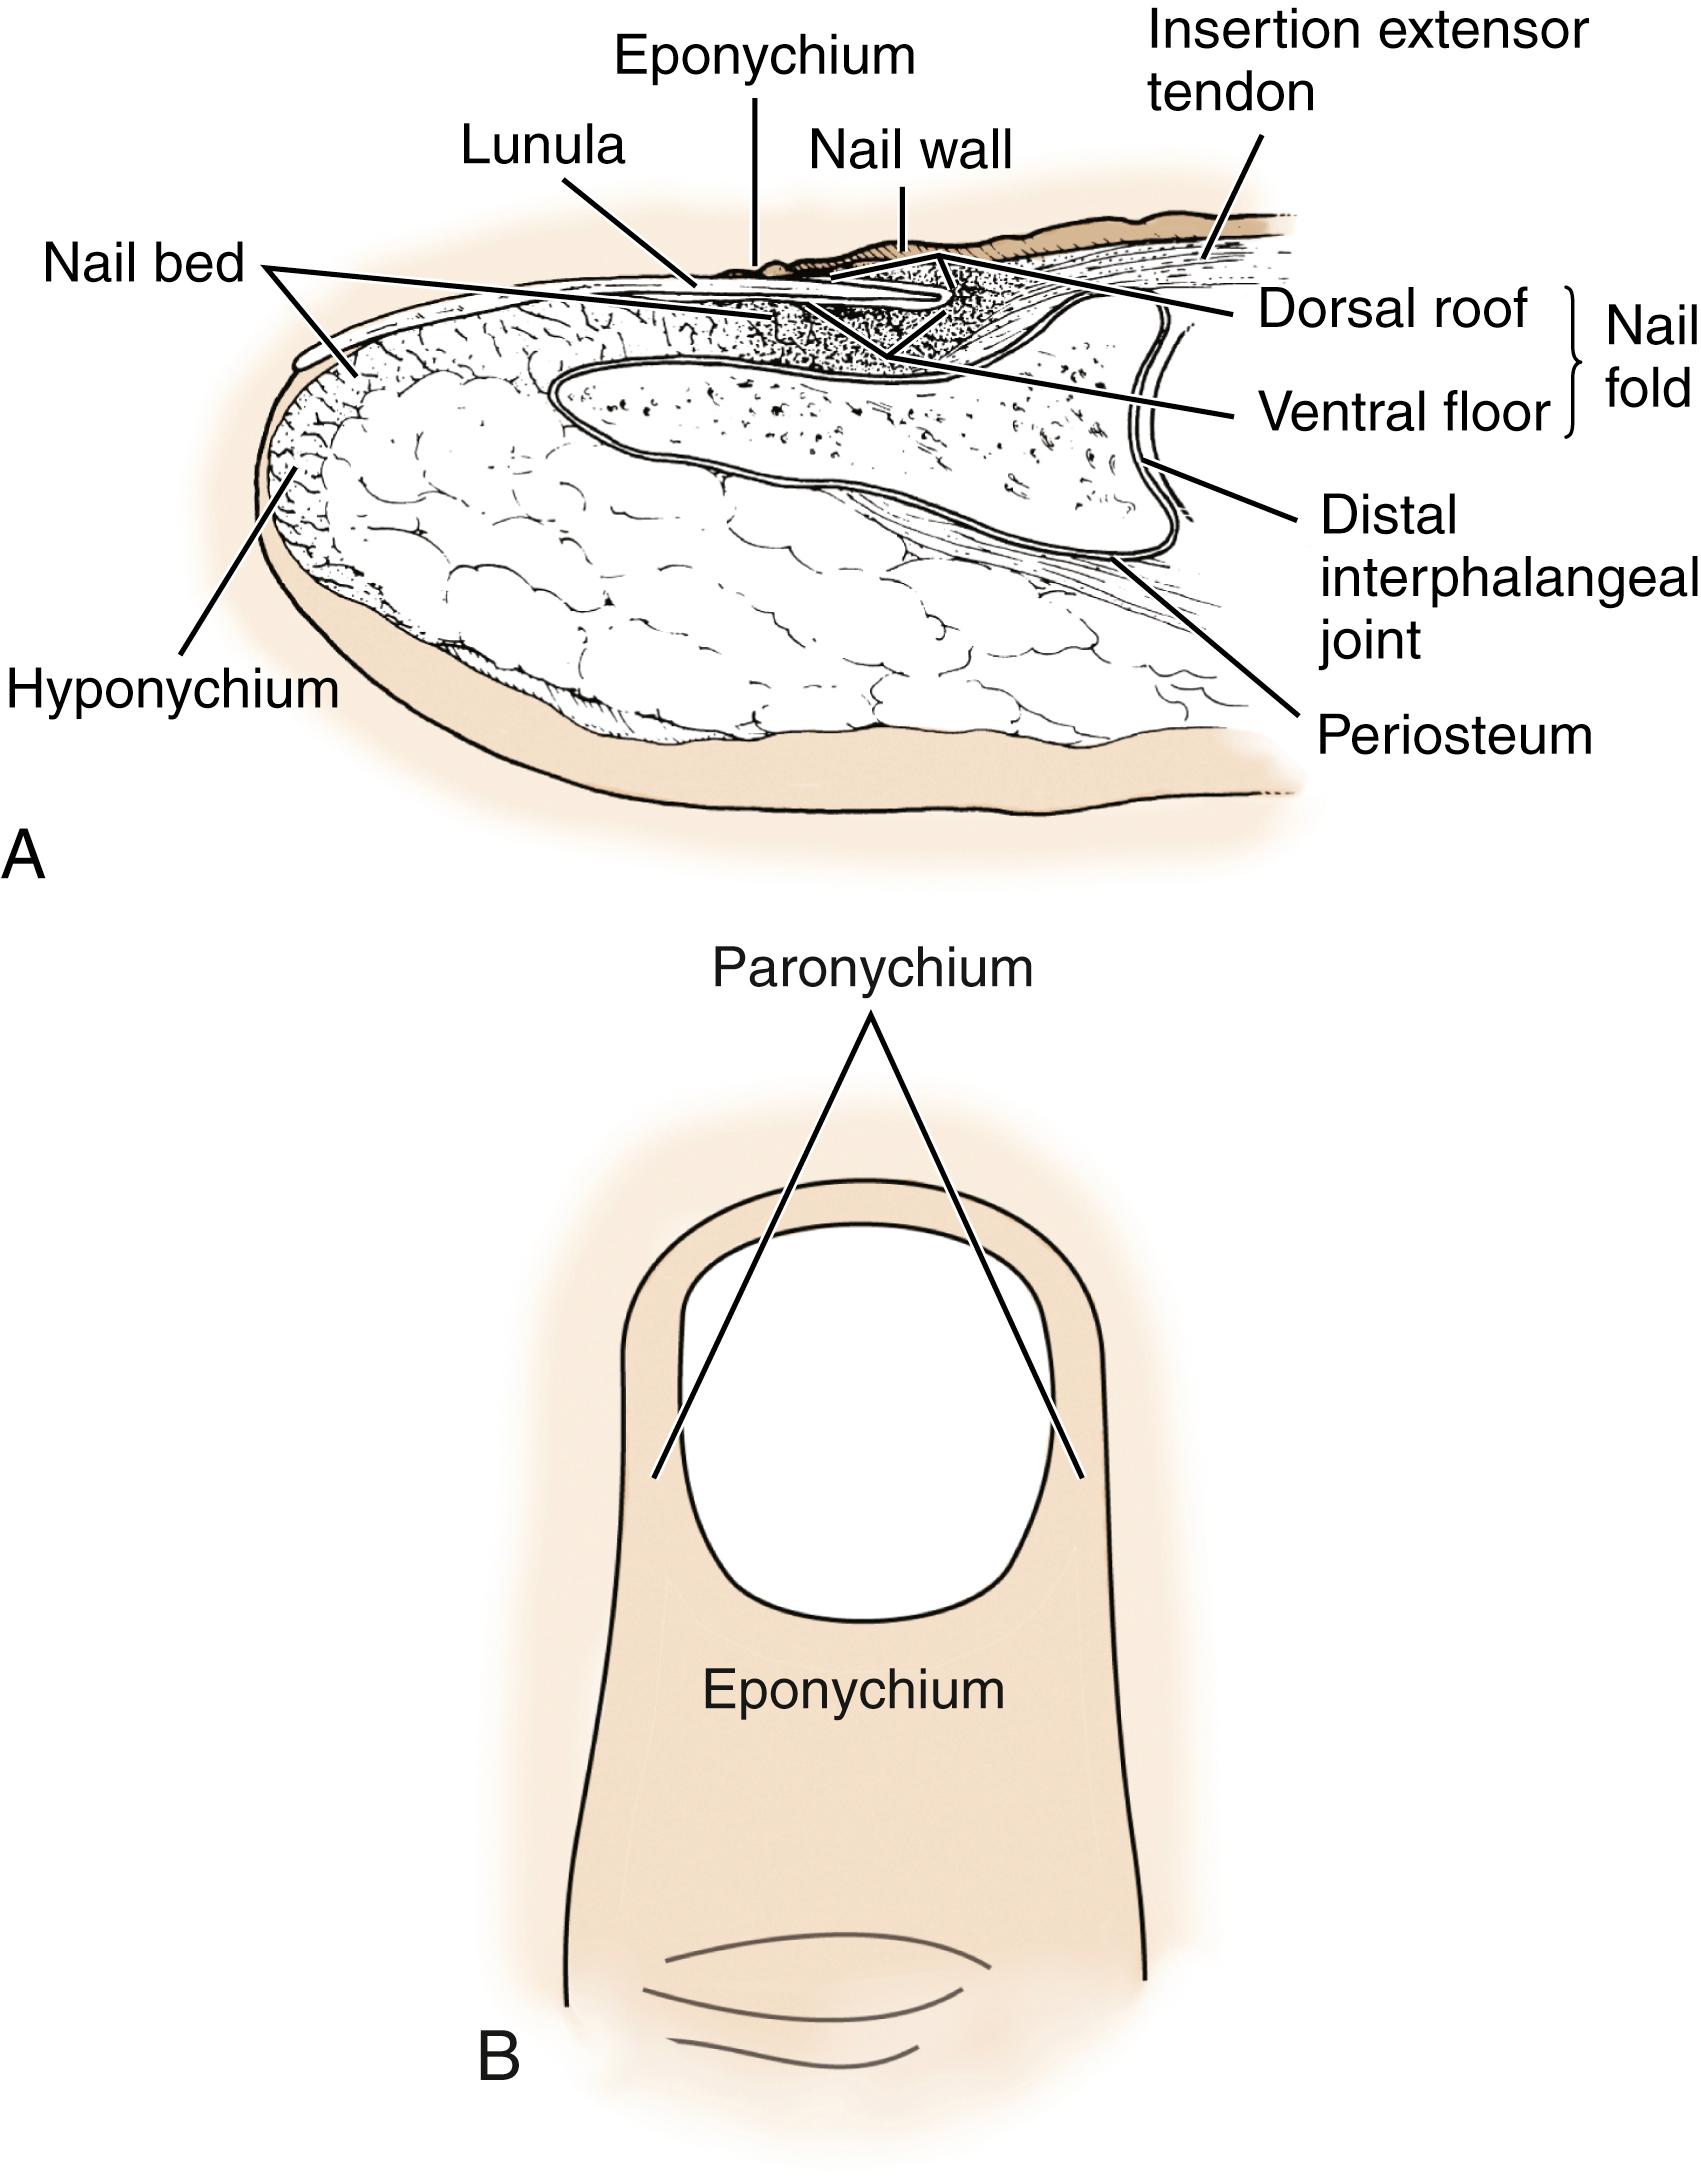 Fig. 9.1, A, Anatomy of the nail bed shown in sagittal section. B, The perionychium includes the paronychium, eponychium, hyponychium, and nail bed.